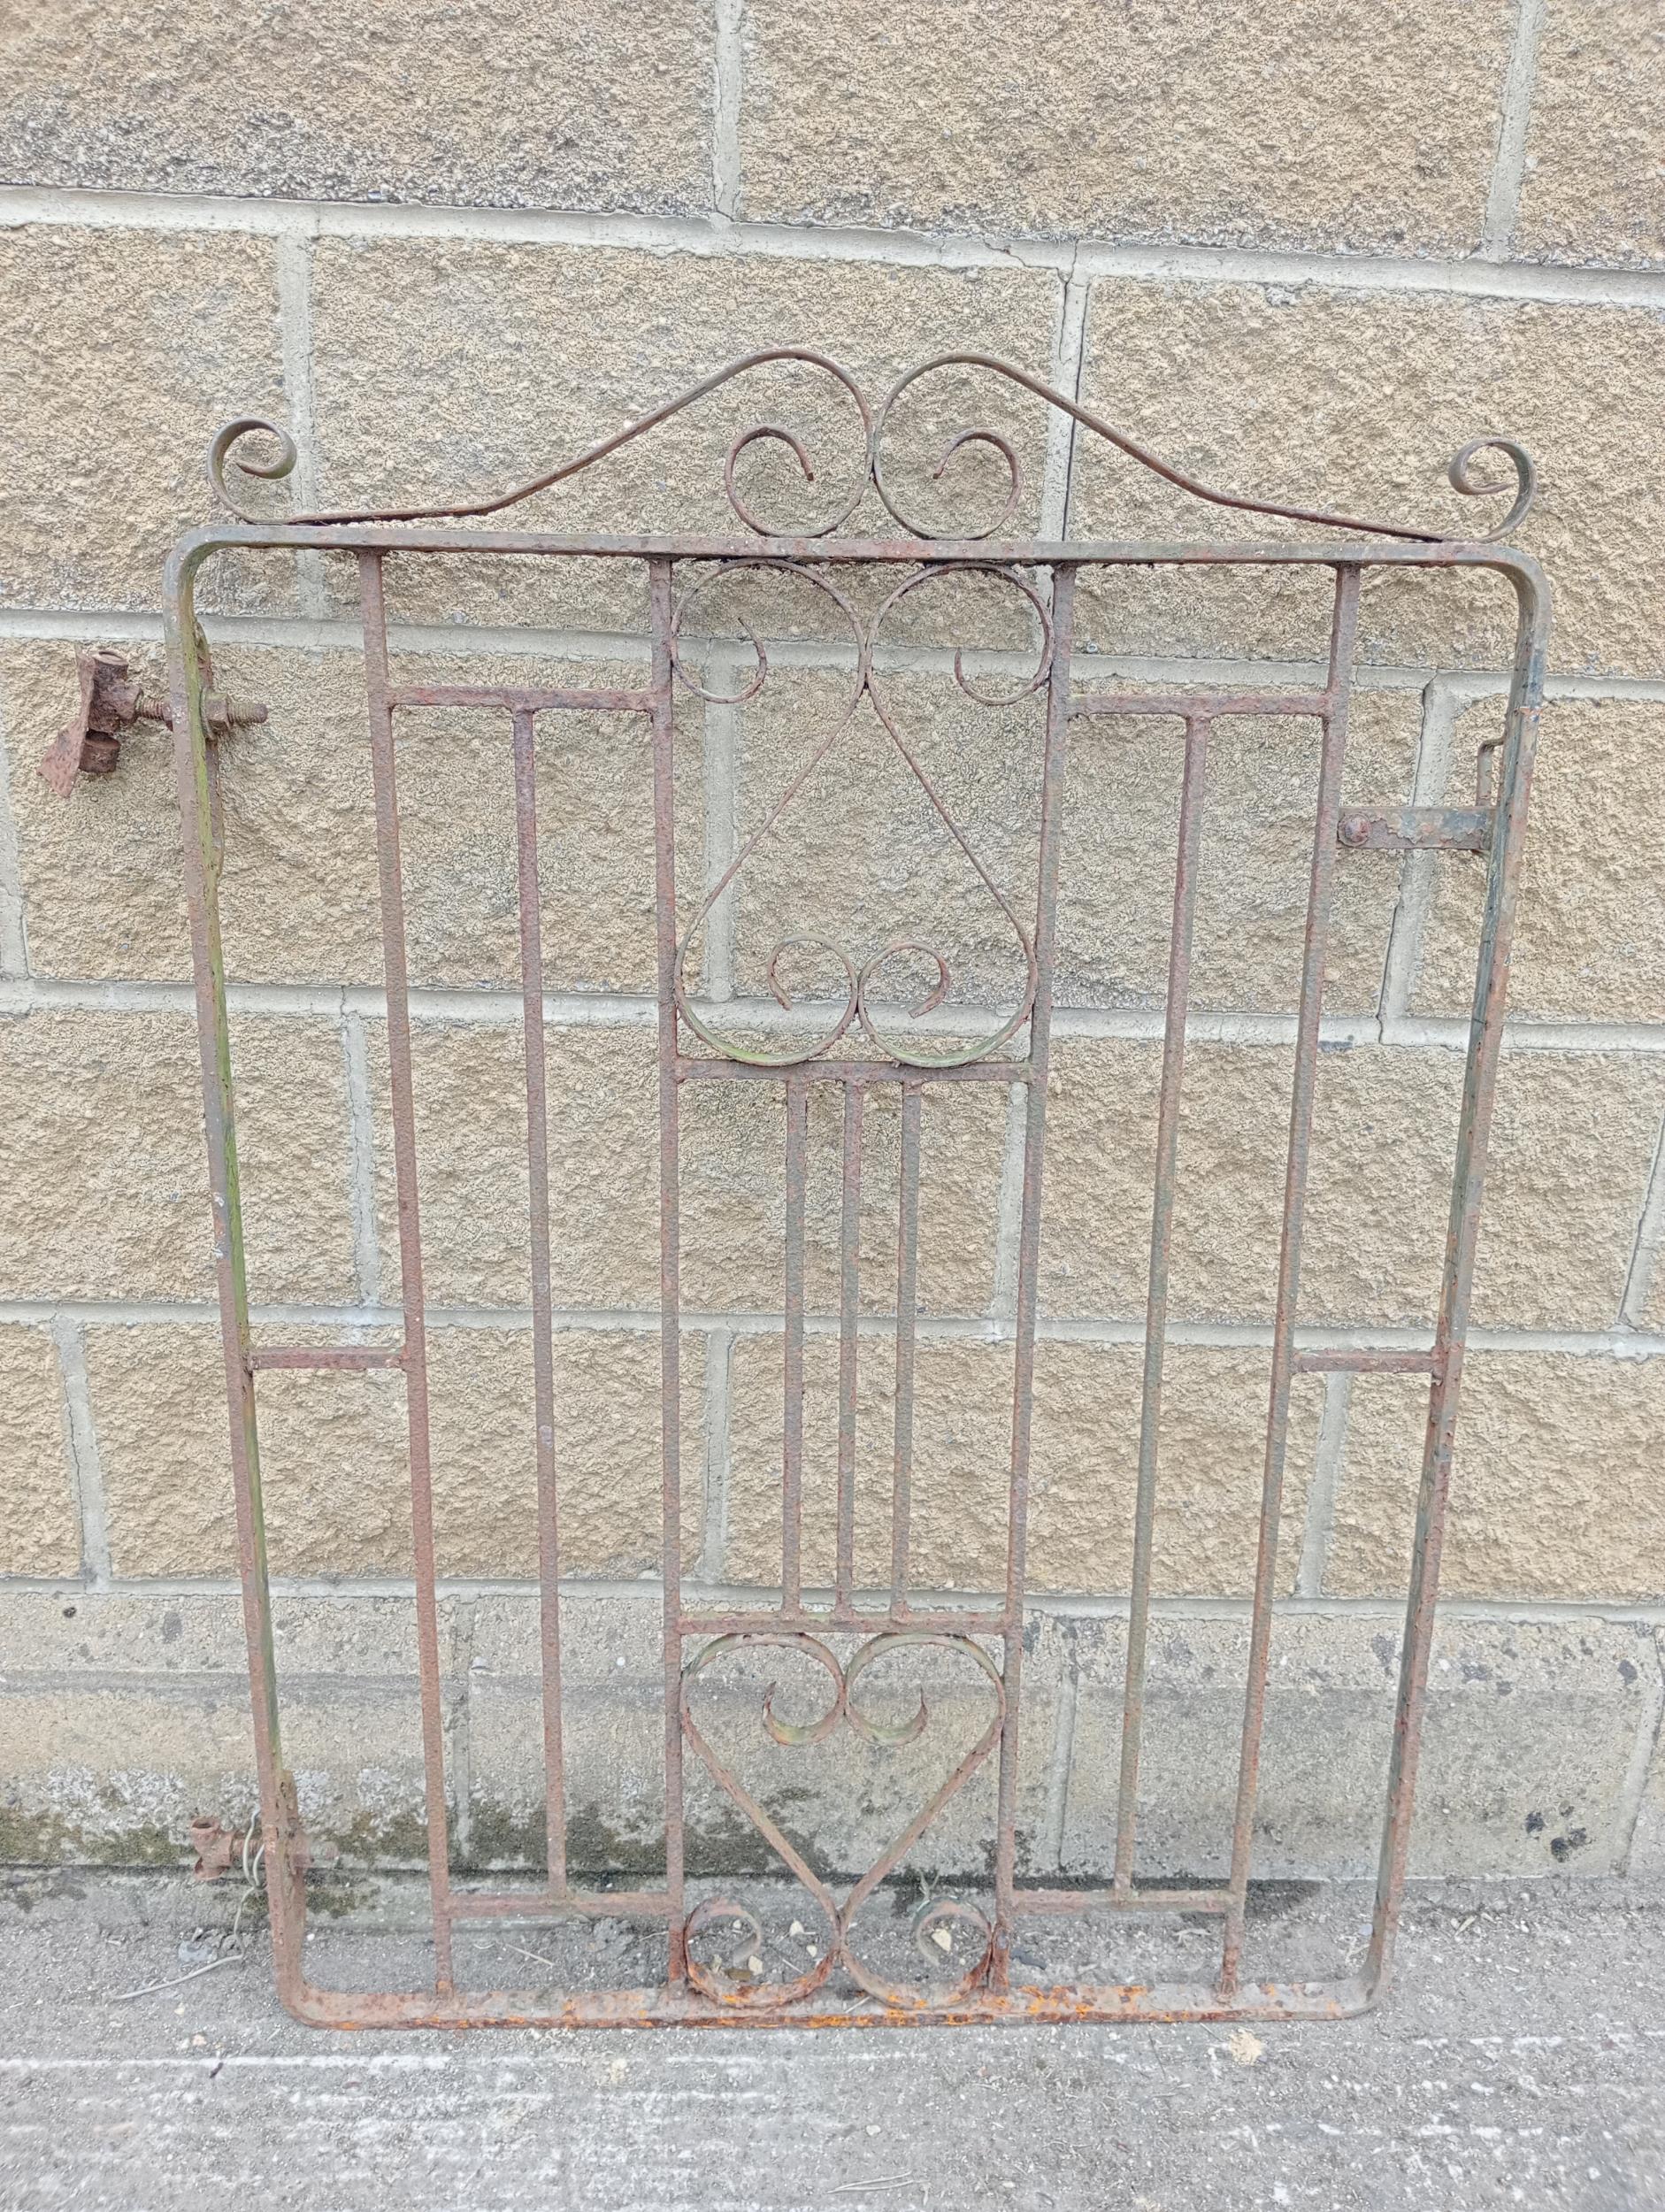 Wrought iron garden gate with scroll design{H 115cm x W 81cm }. (NOT AVAILABLE TO VIEW IN PERSON)